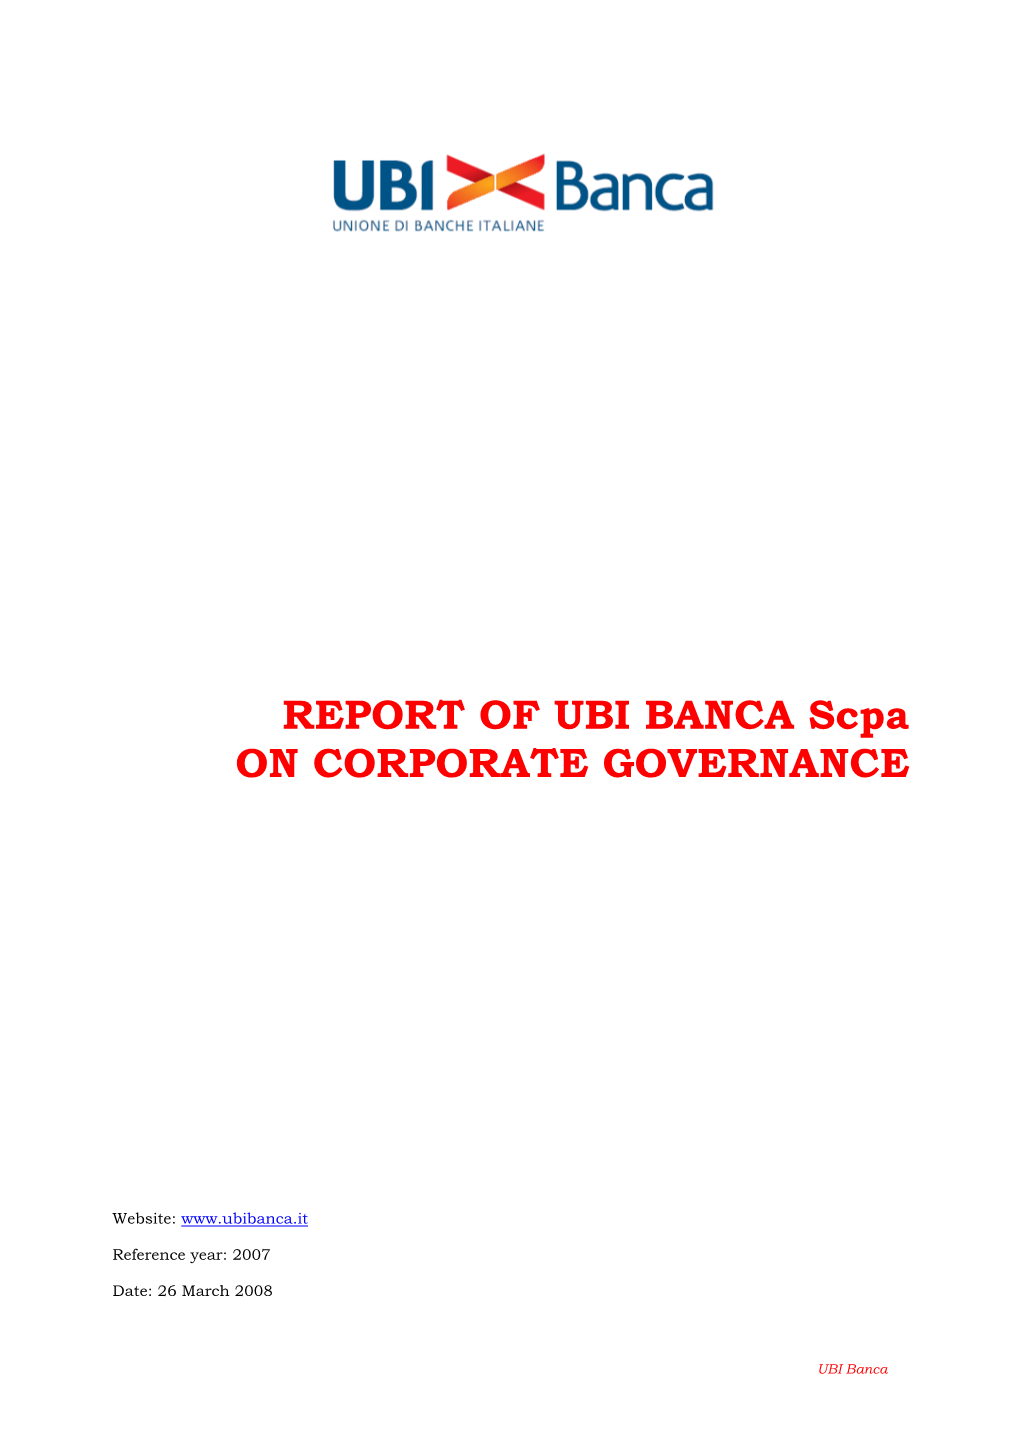 REPORT of UBI BANCA Scpa on CORPORATE GOVERNANCE